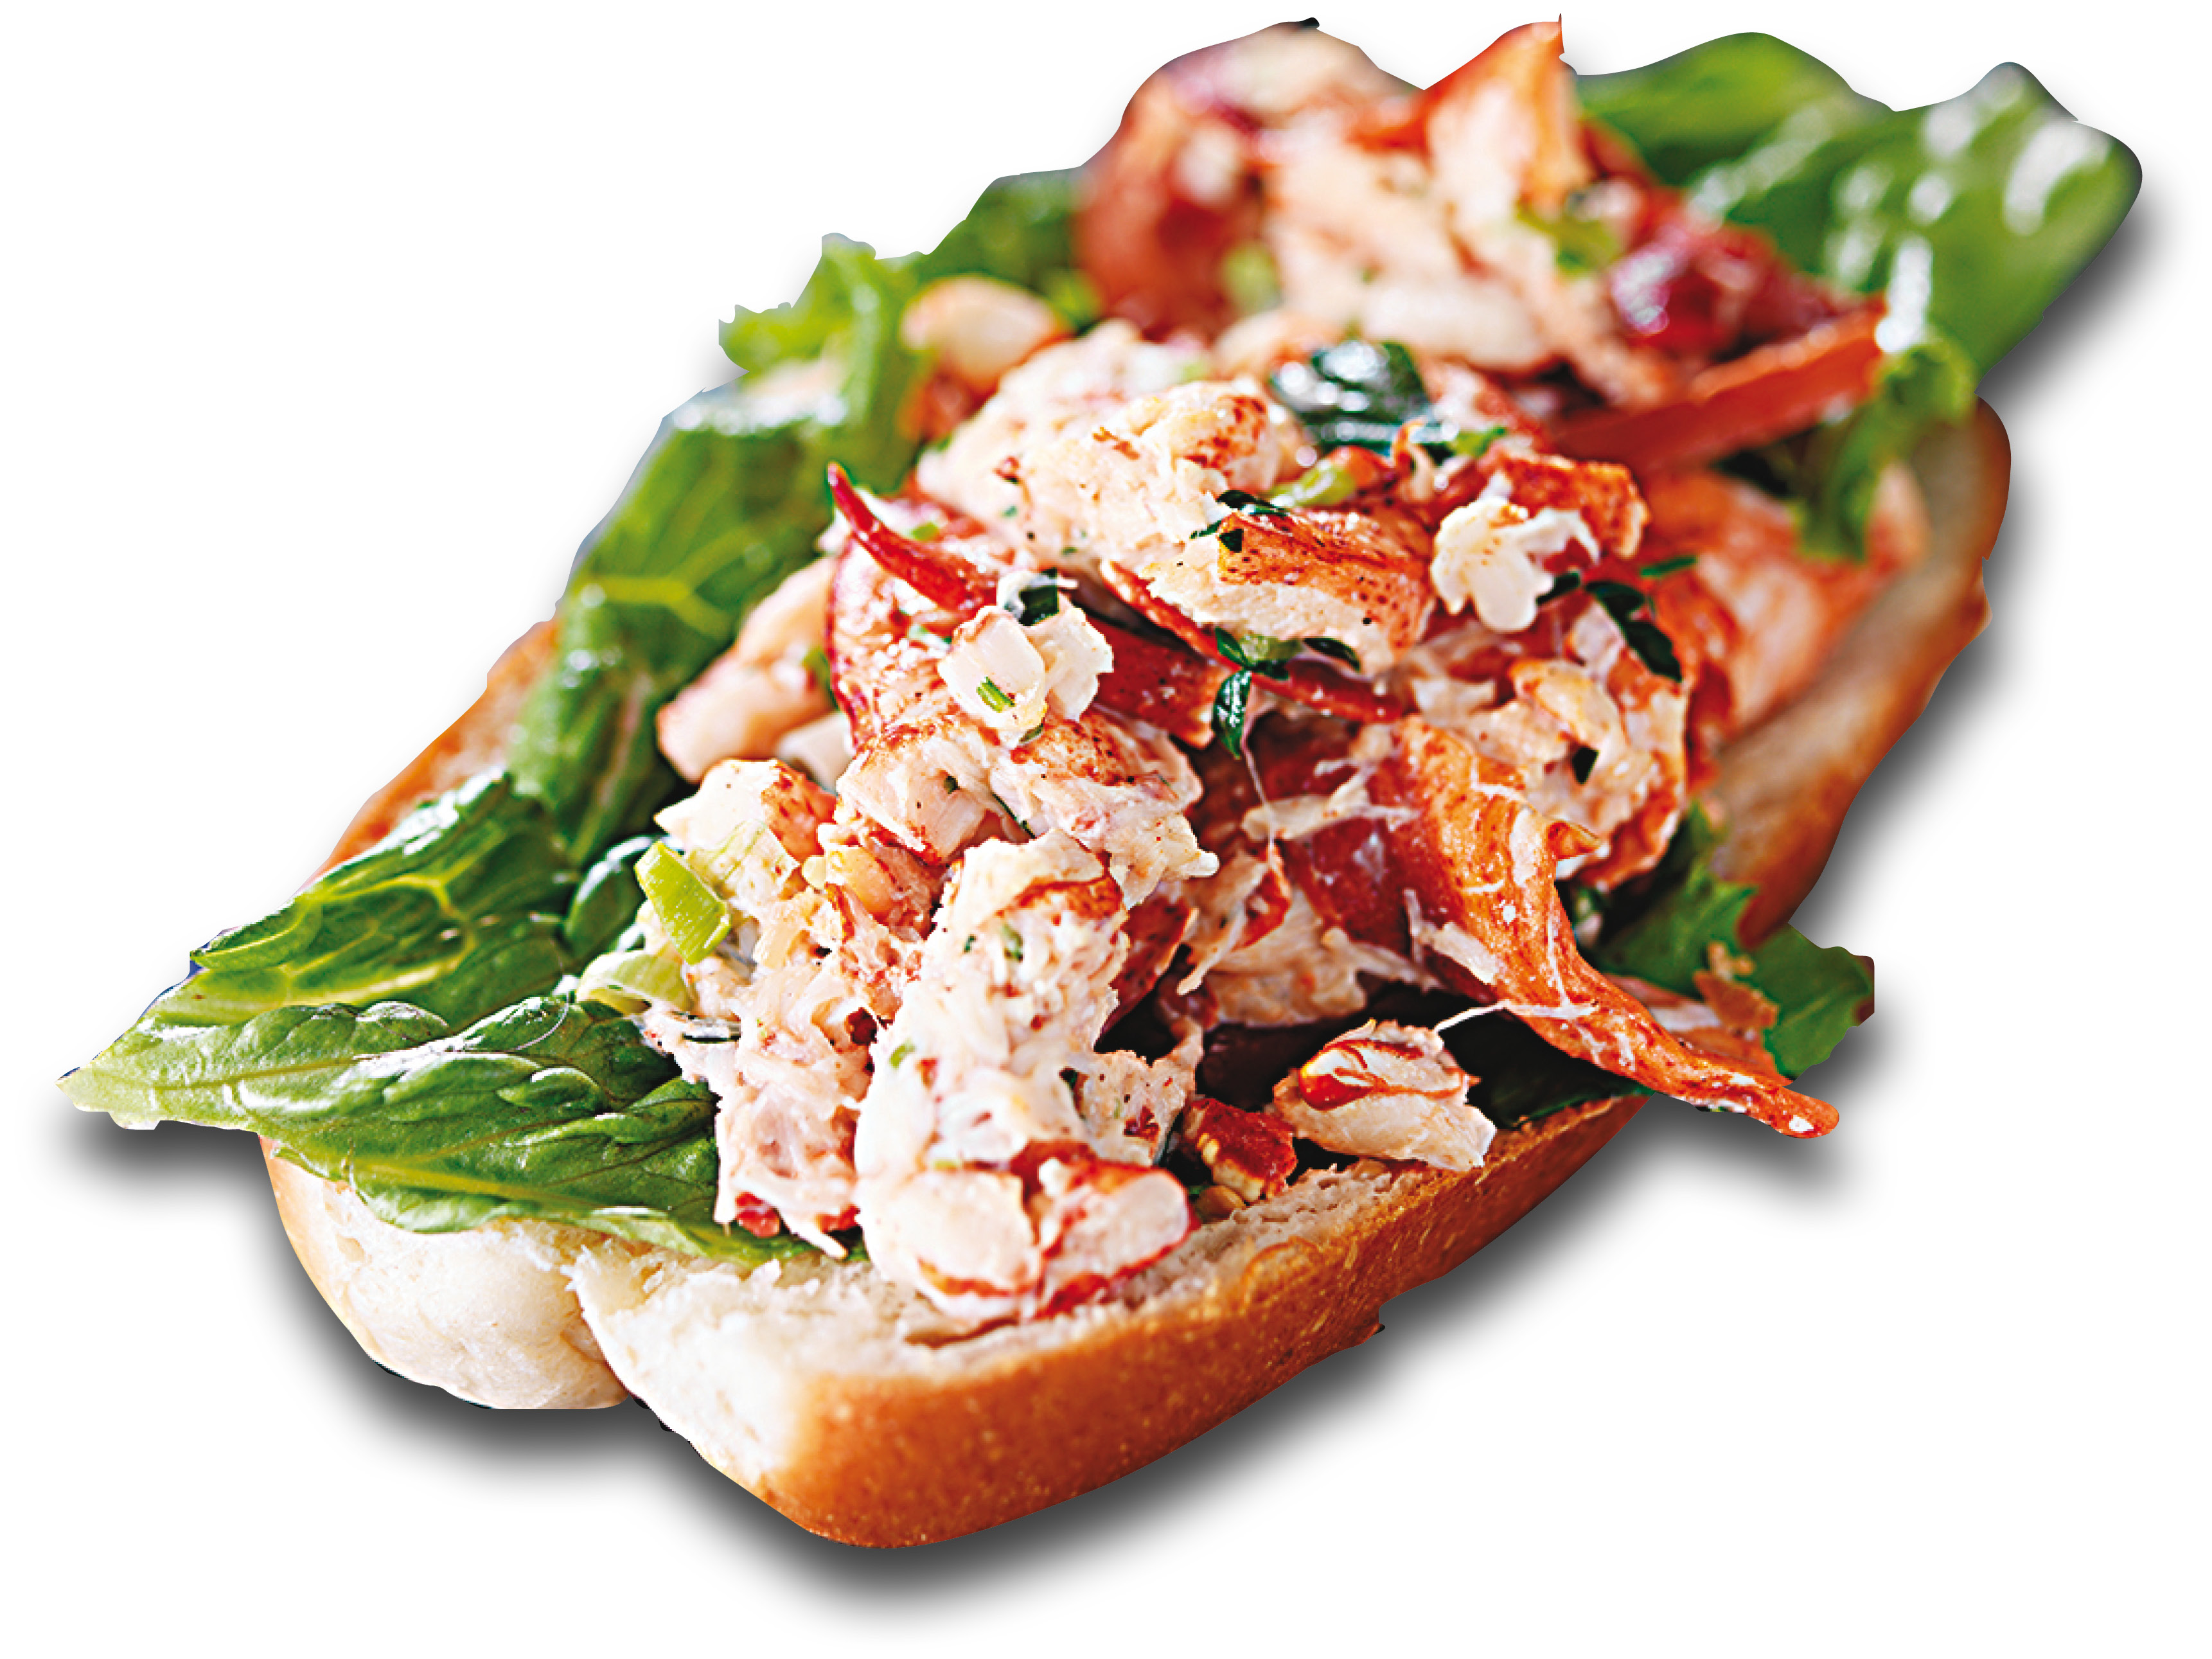 The lobster roll became popular on the North East coast of the US, when lobsters were plentiful and cheap